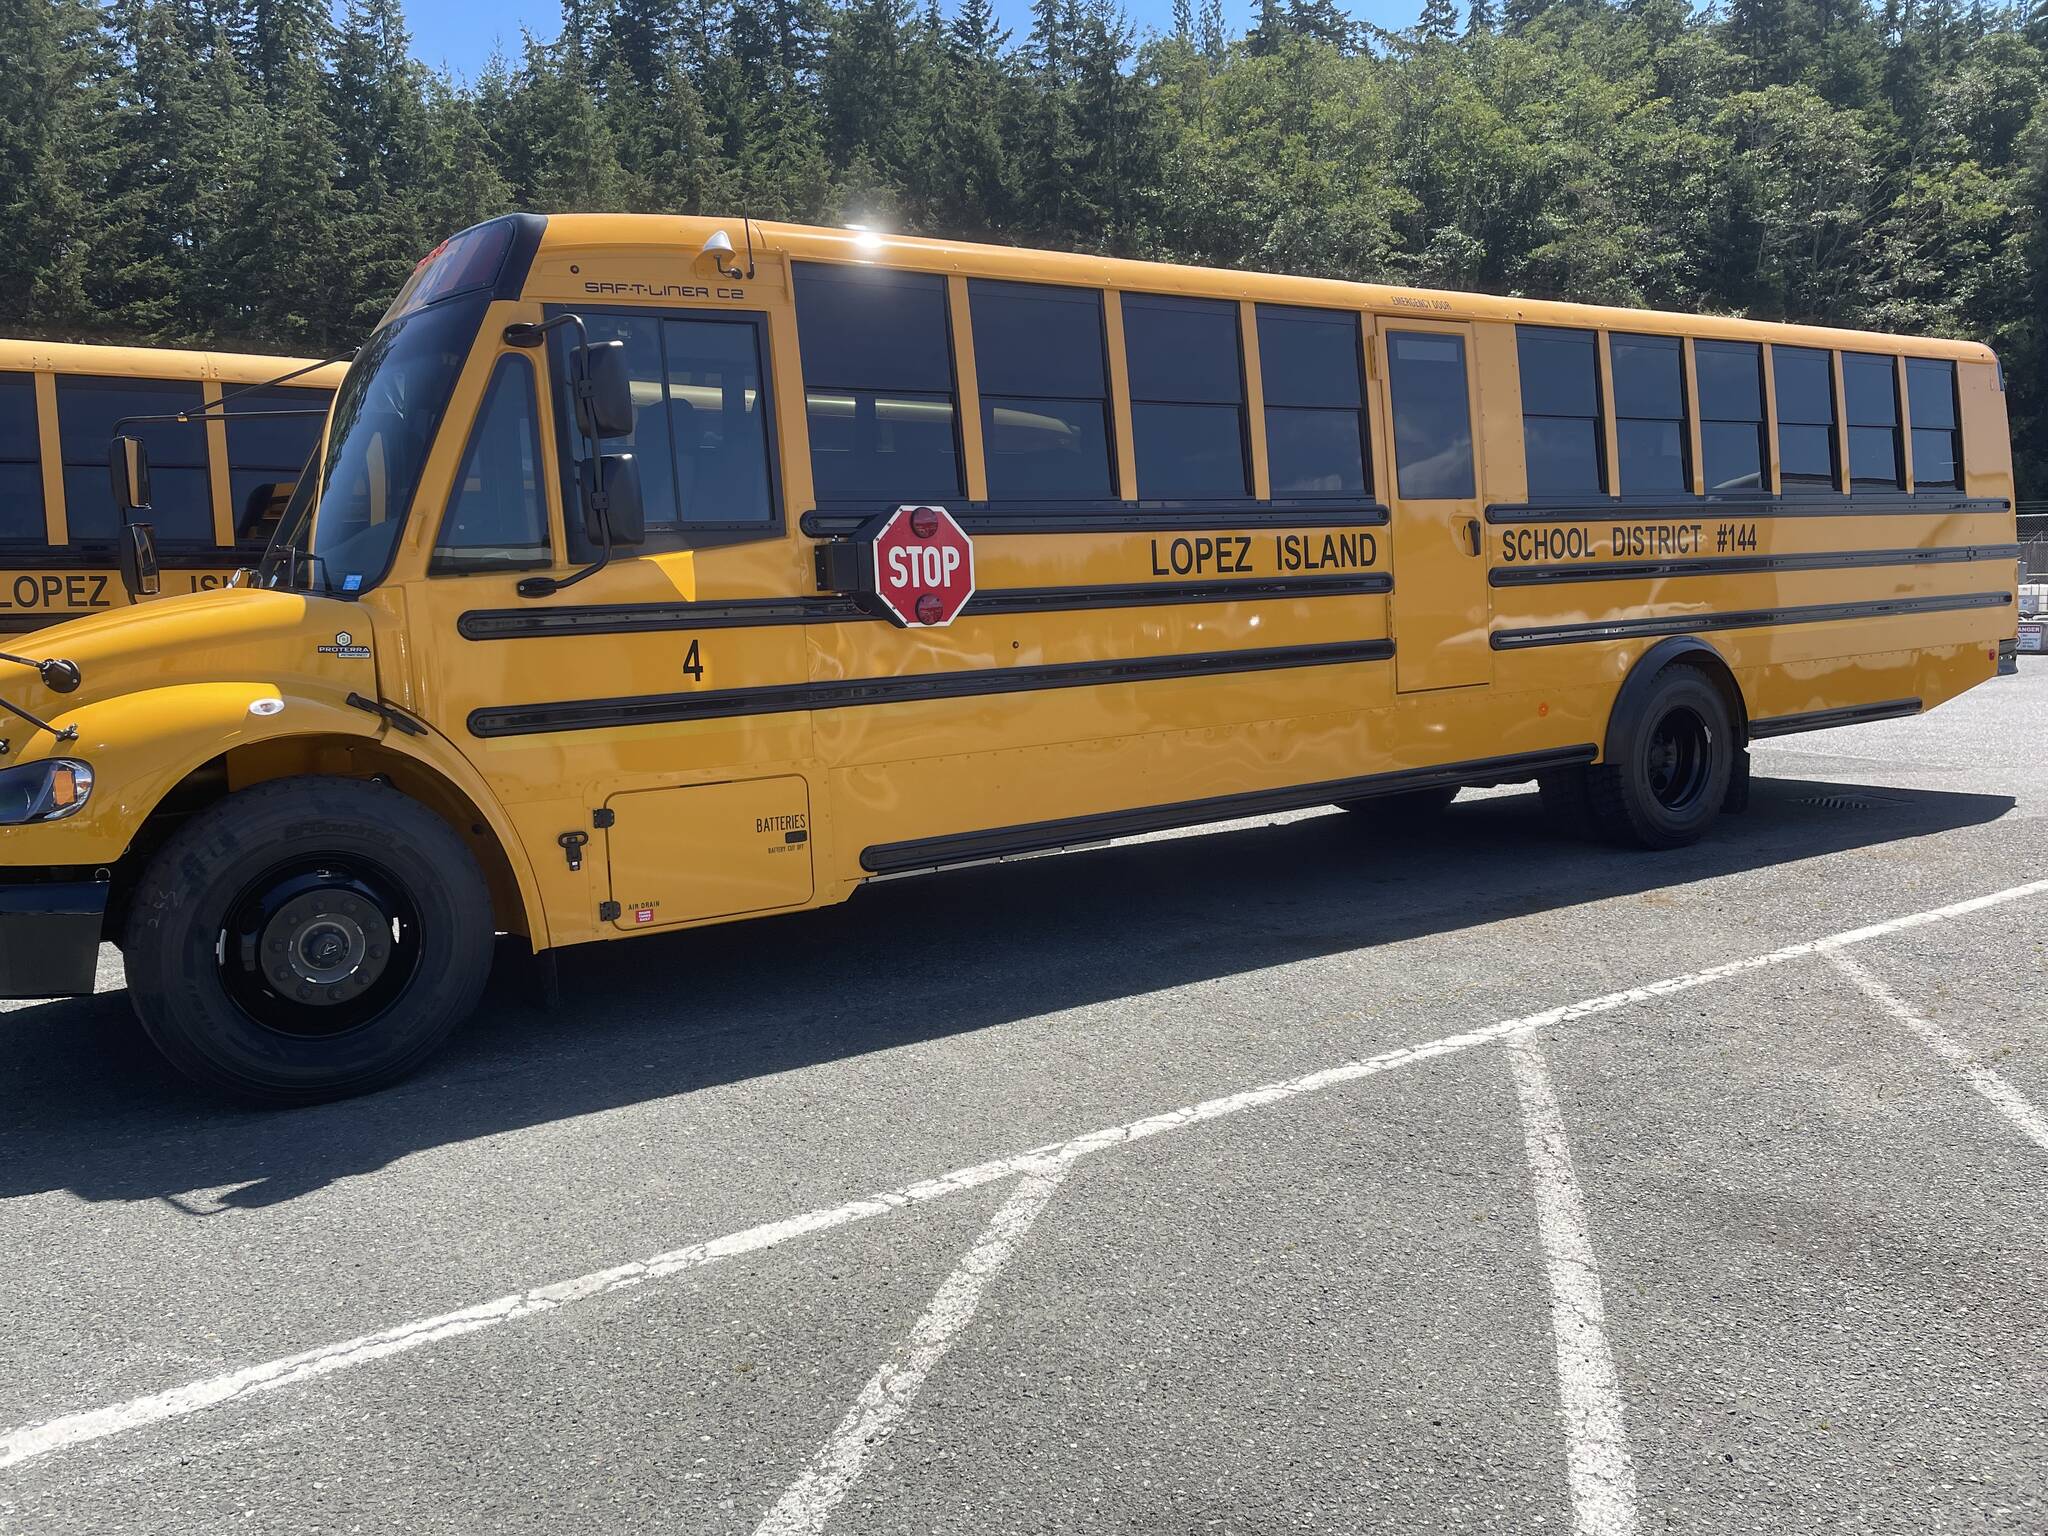 Contributed photo
The new electric school bus was purchased with a $325,000 grant from the Washington Department of Ecology that covers the cost difference between an all-electric bus and a comparable diesel bus.